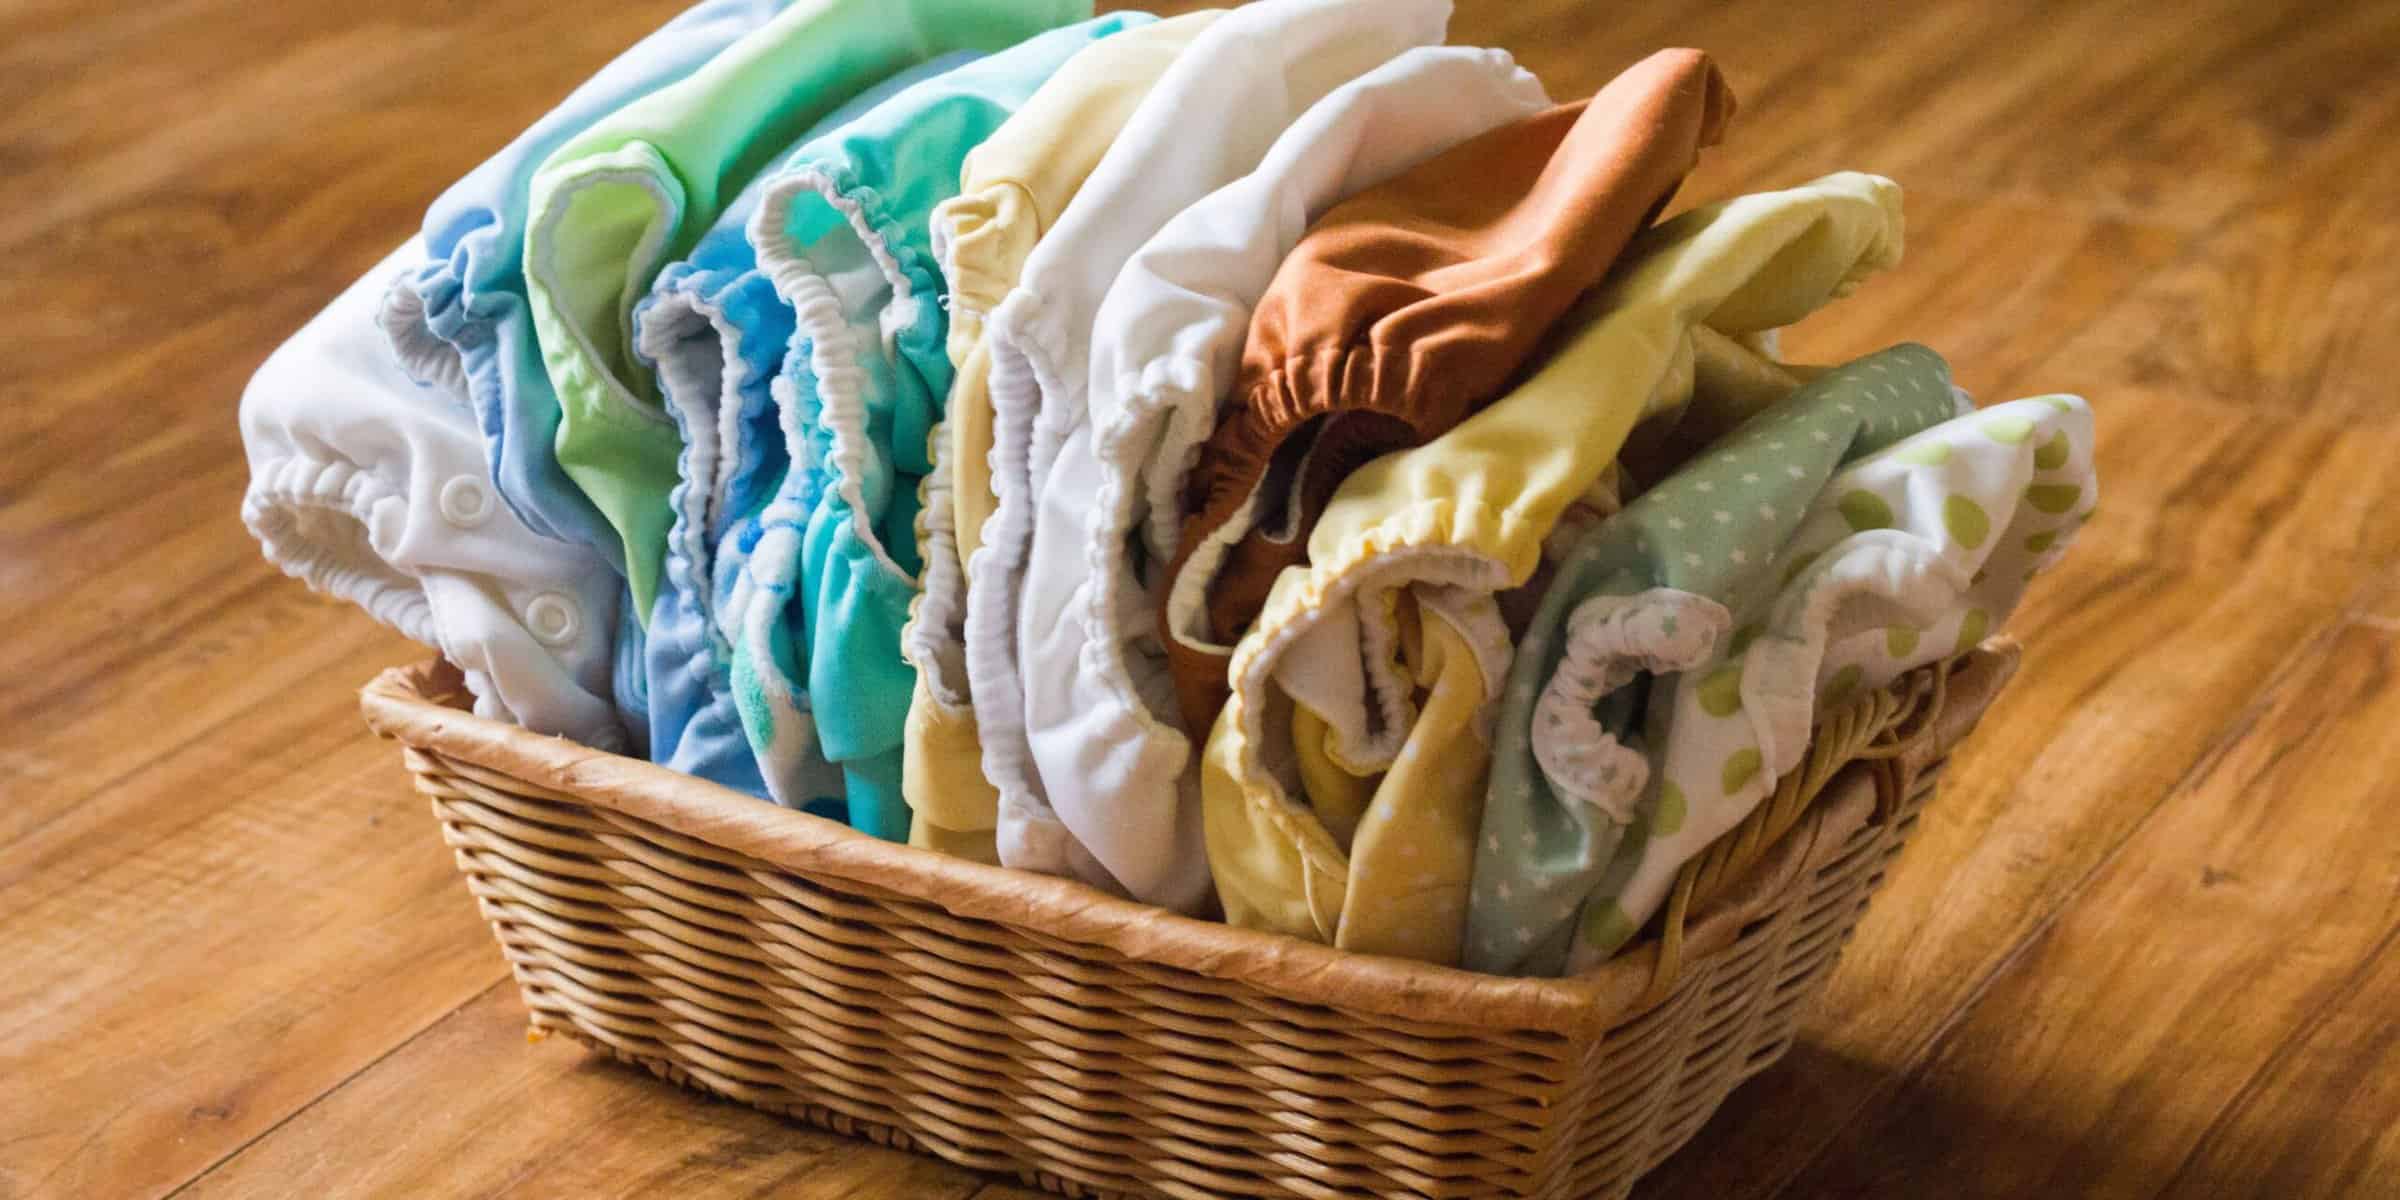 How To Wash Cloth Diapers For The First Time